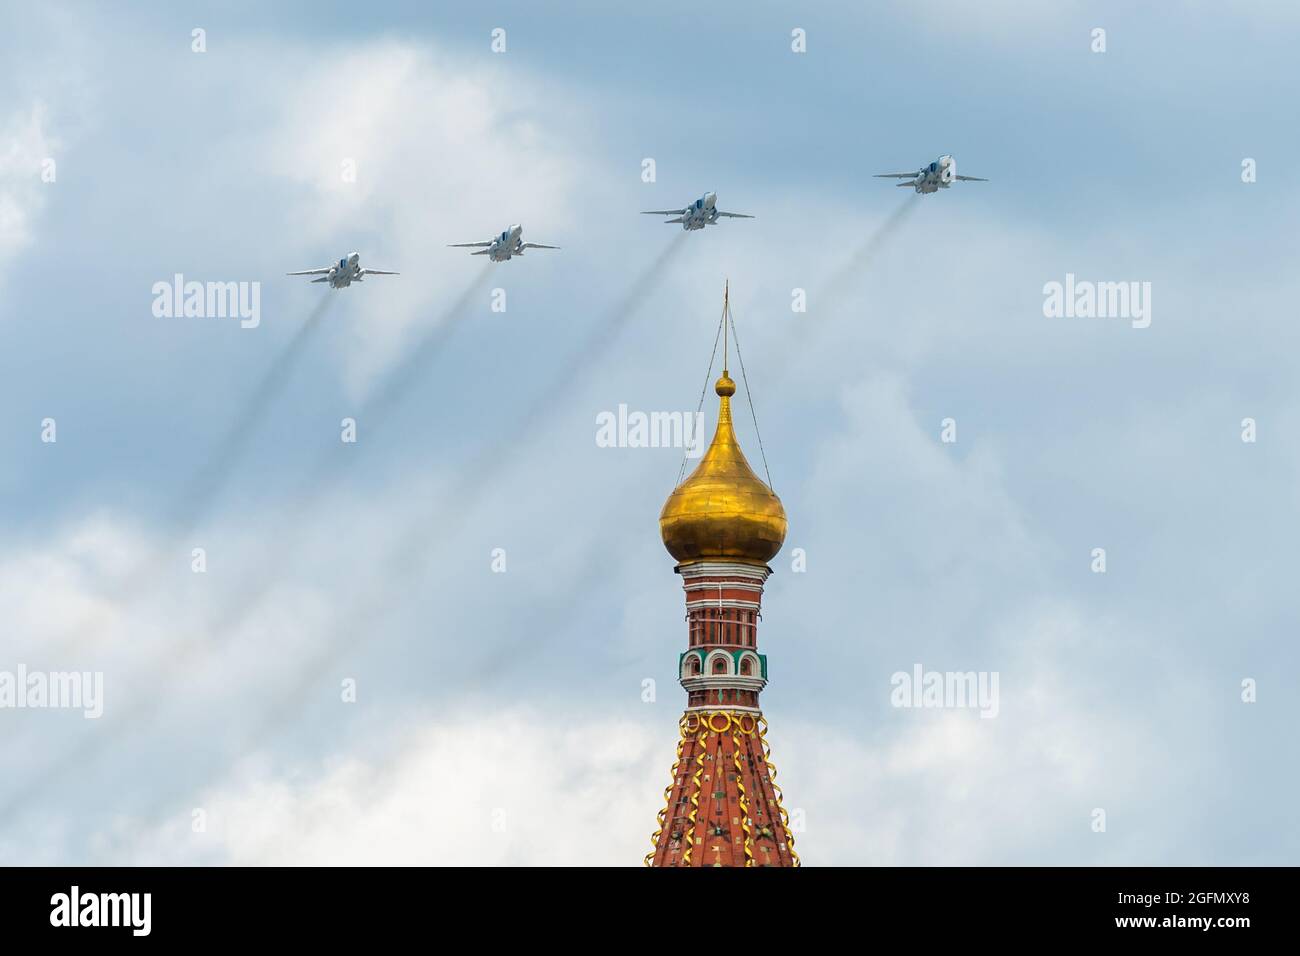 May 7, 2021, Moscow, Russia. Russian front-line Su-24 bombers over Red Square in Moscow. Stock Photo